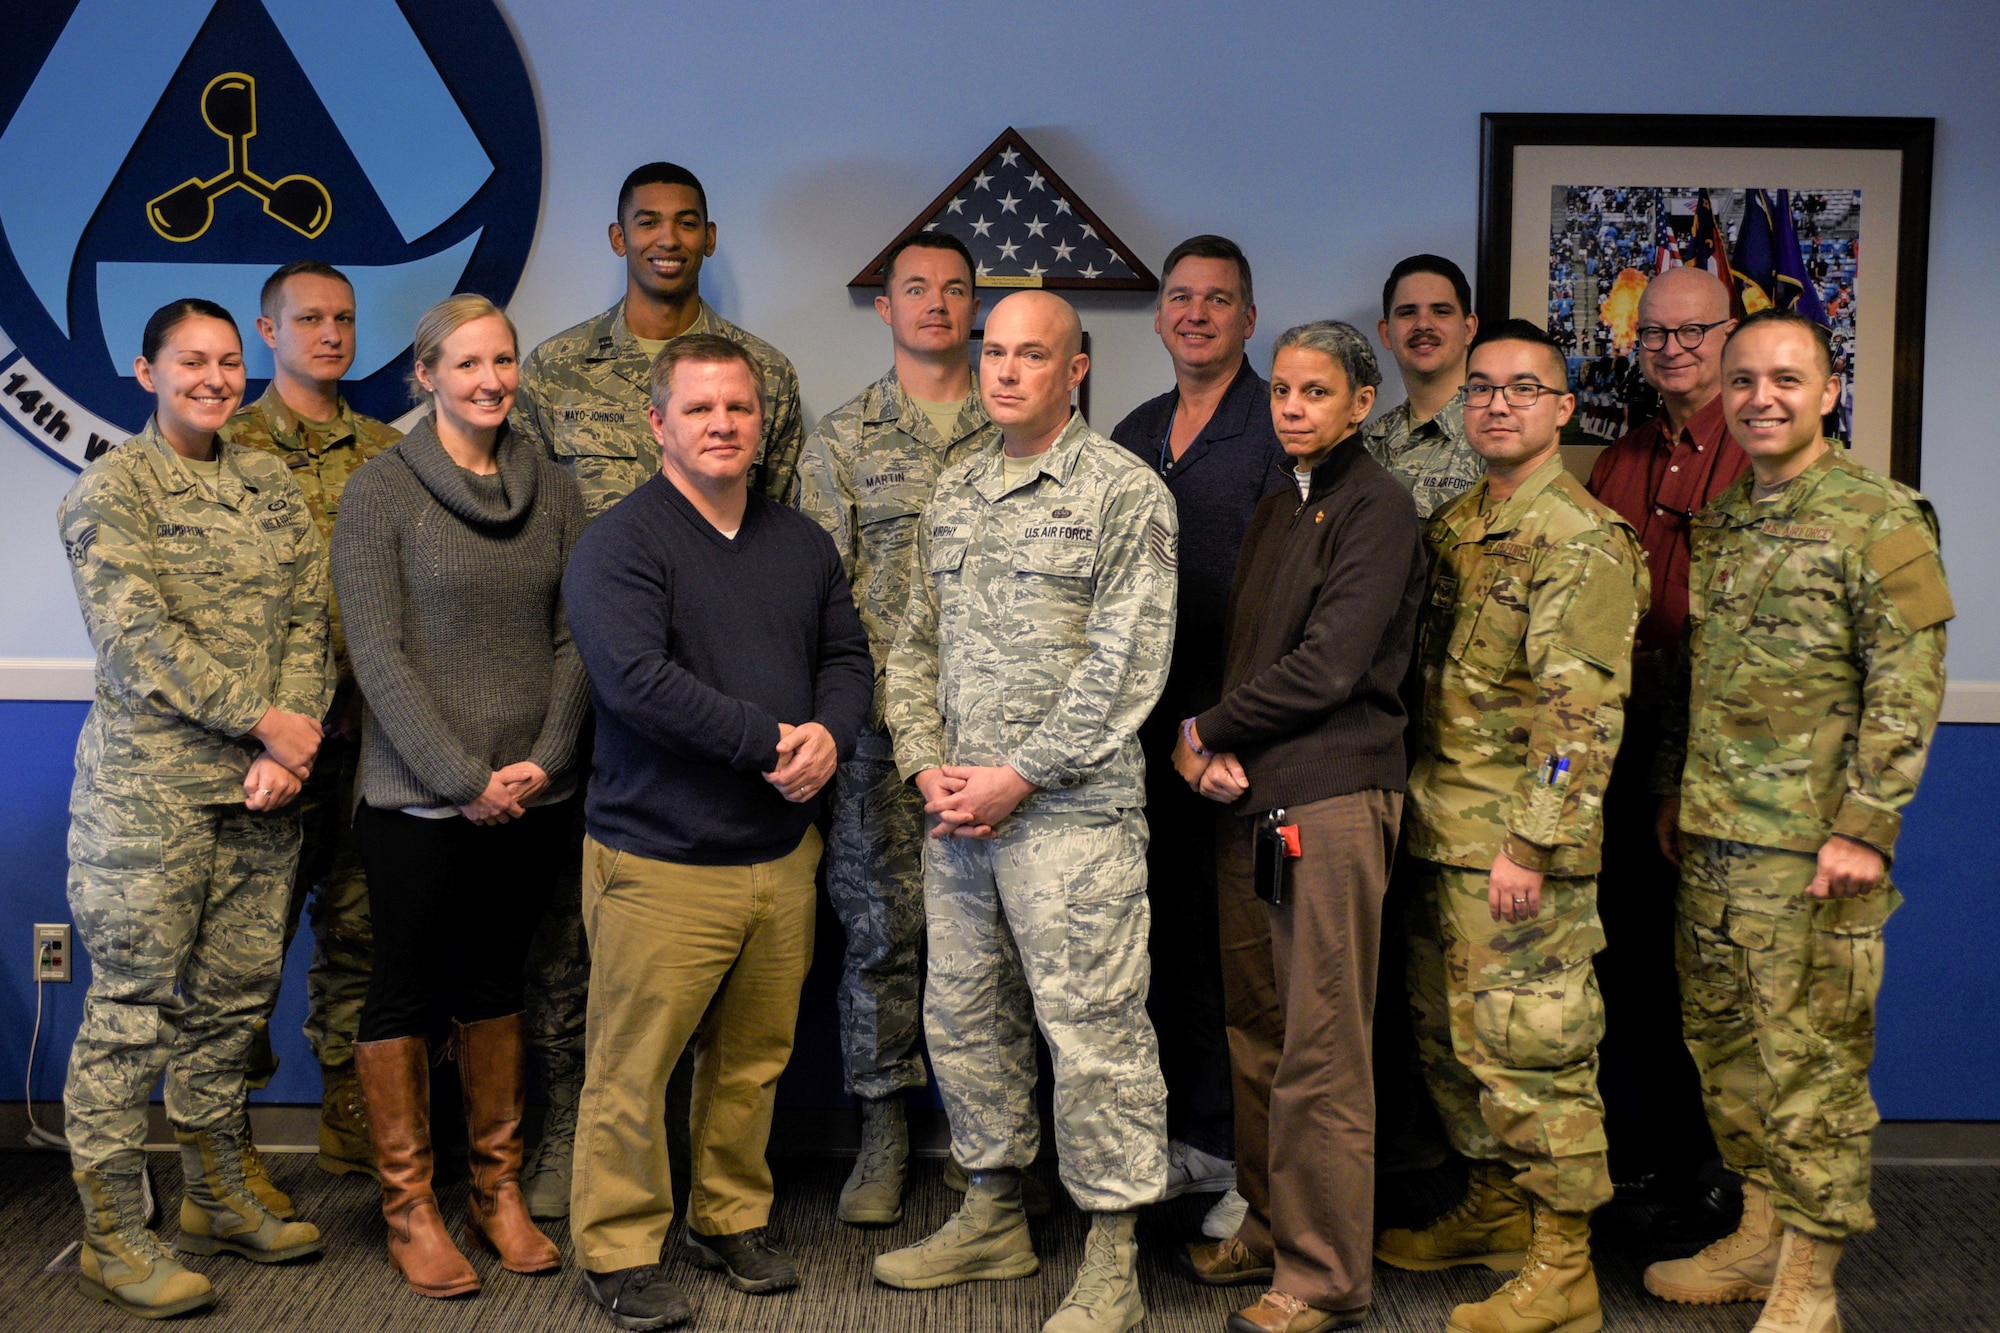 Members of the 14th Weather Squadron Climate Go-Kit development team pose for a group photo at their Asheville, North Carolina, office Jan. 31, 2019. By utilizing in-house resources, the development team was able to build the go-kit system in approximately six months, saving approximately $128,000 versus outsourcing the development. (U.S. Air Force photo by Staff Sgt. Charles Buckler)